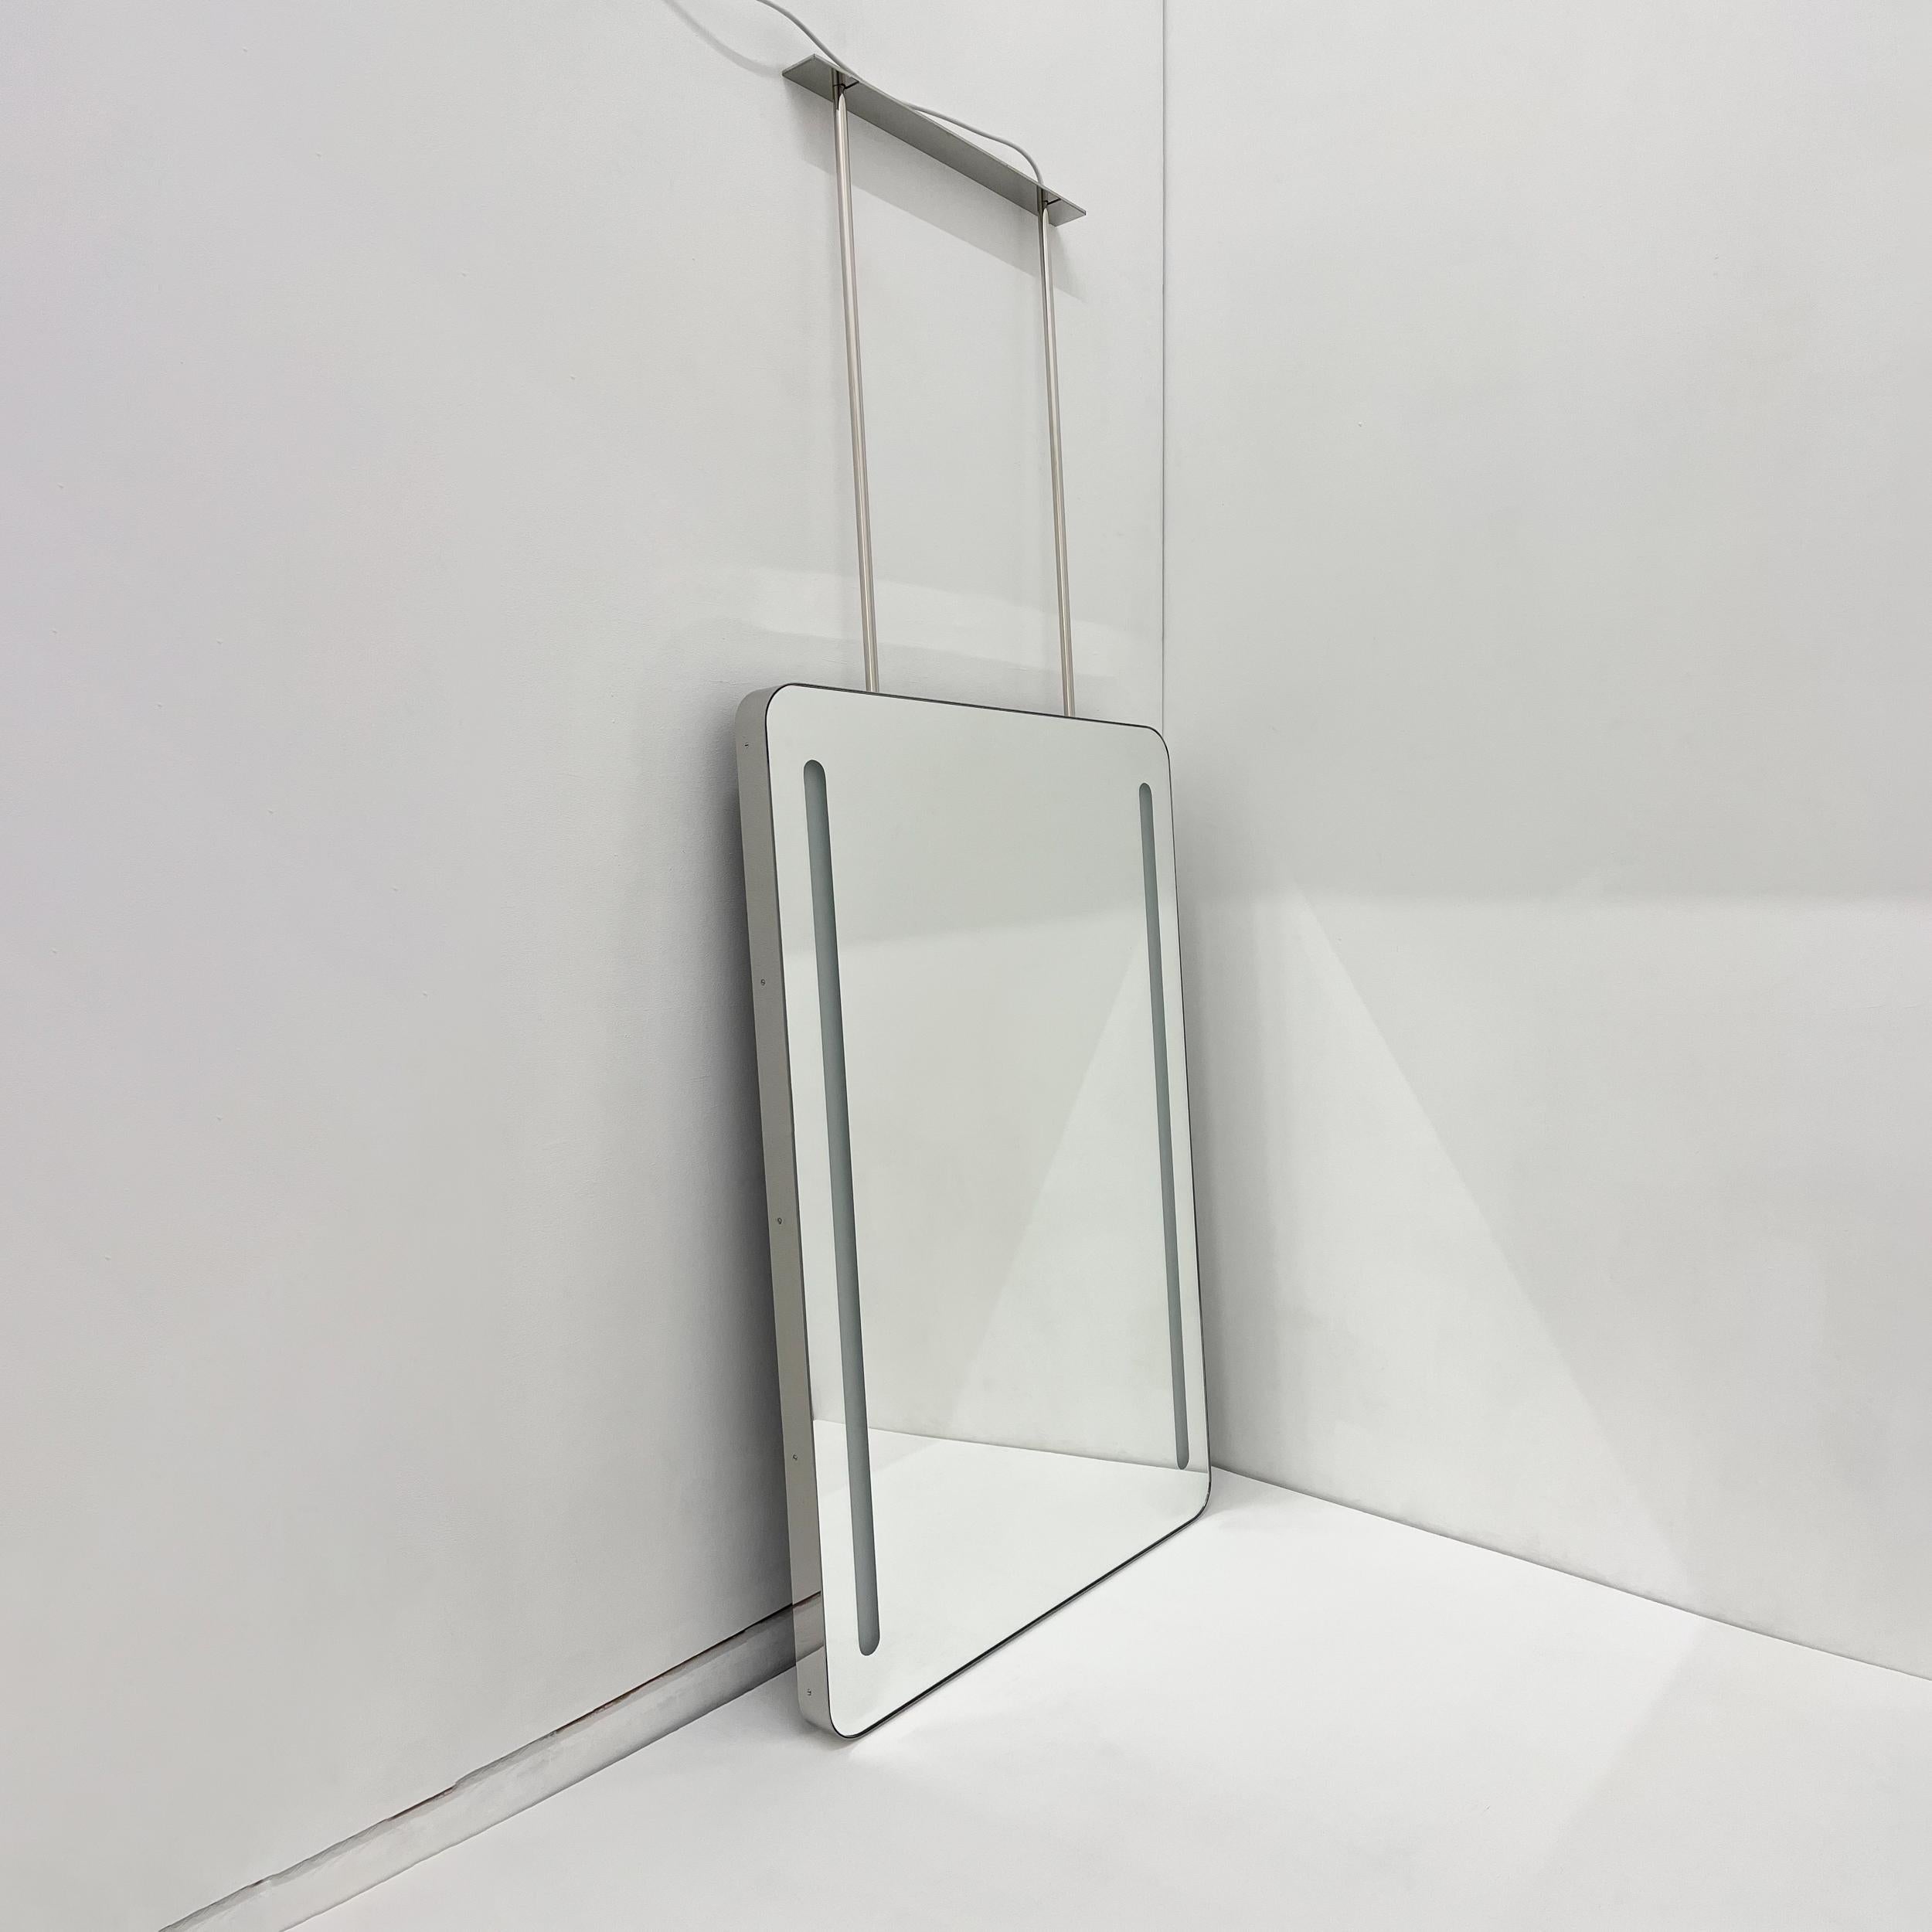 Illuminated Quadris Ceiling Suspended Rectangular Mirror Stainless Steel Frame In New Condition For Sale In London, GB